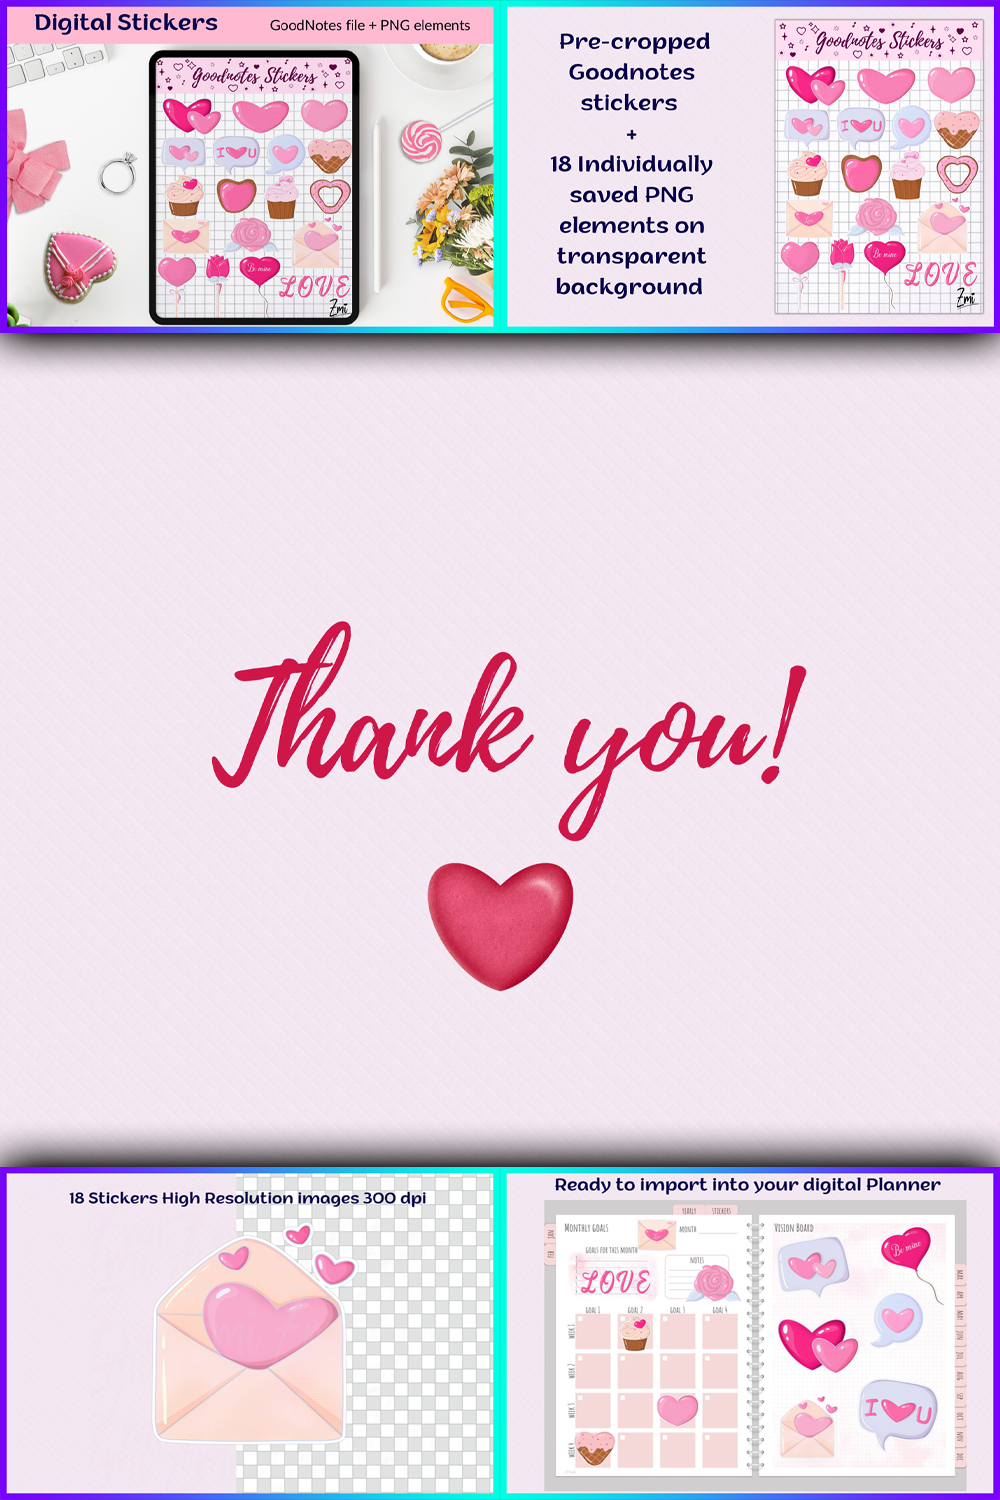 Illustrations valentines png digital stickers pack and goodnotes of pinterest.